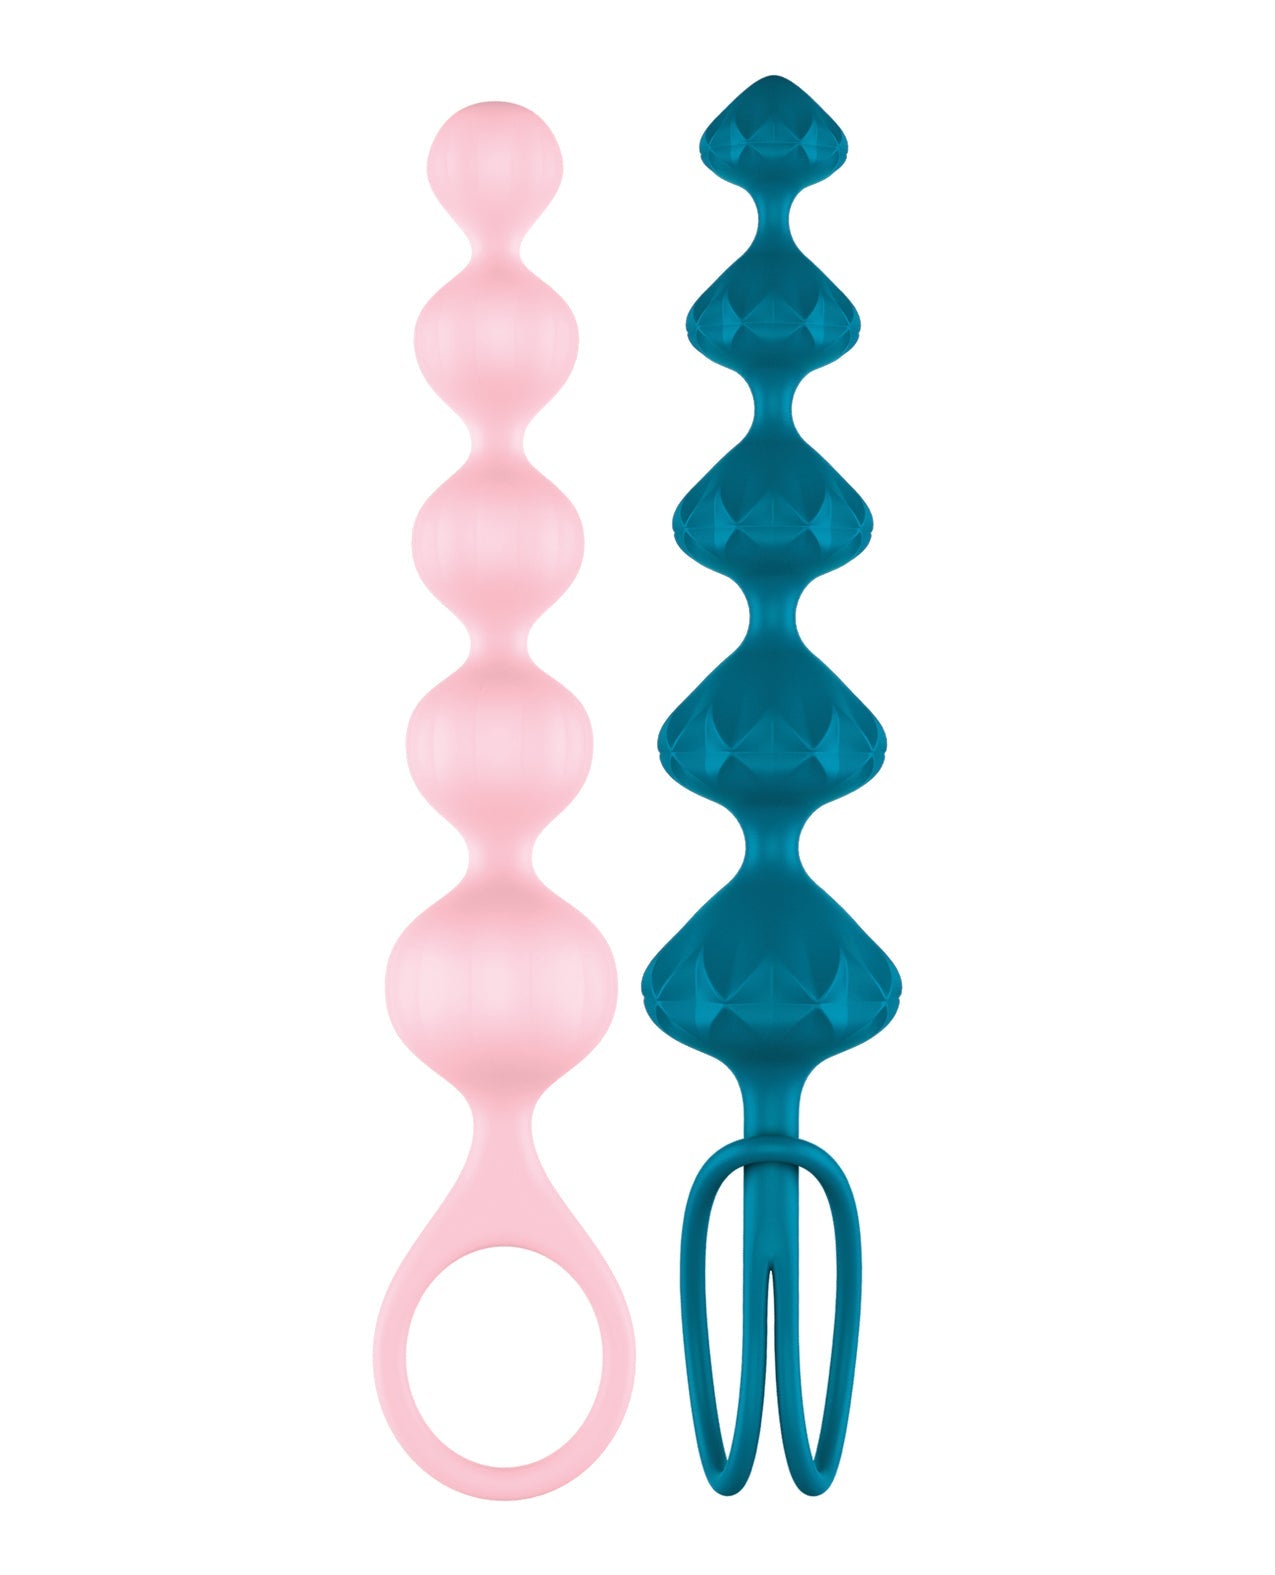 Satisfyer Love Beads Soft Silicone Beads - Blue & Pink